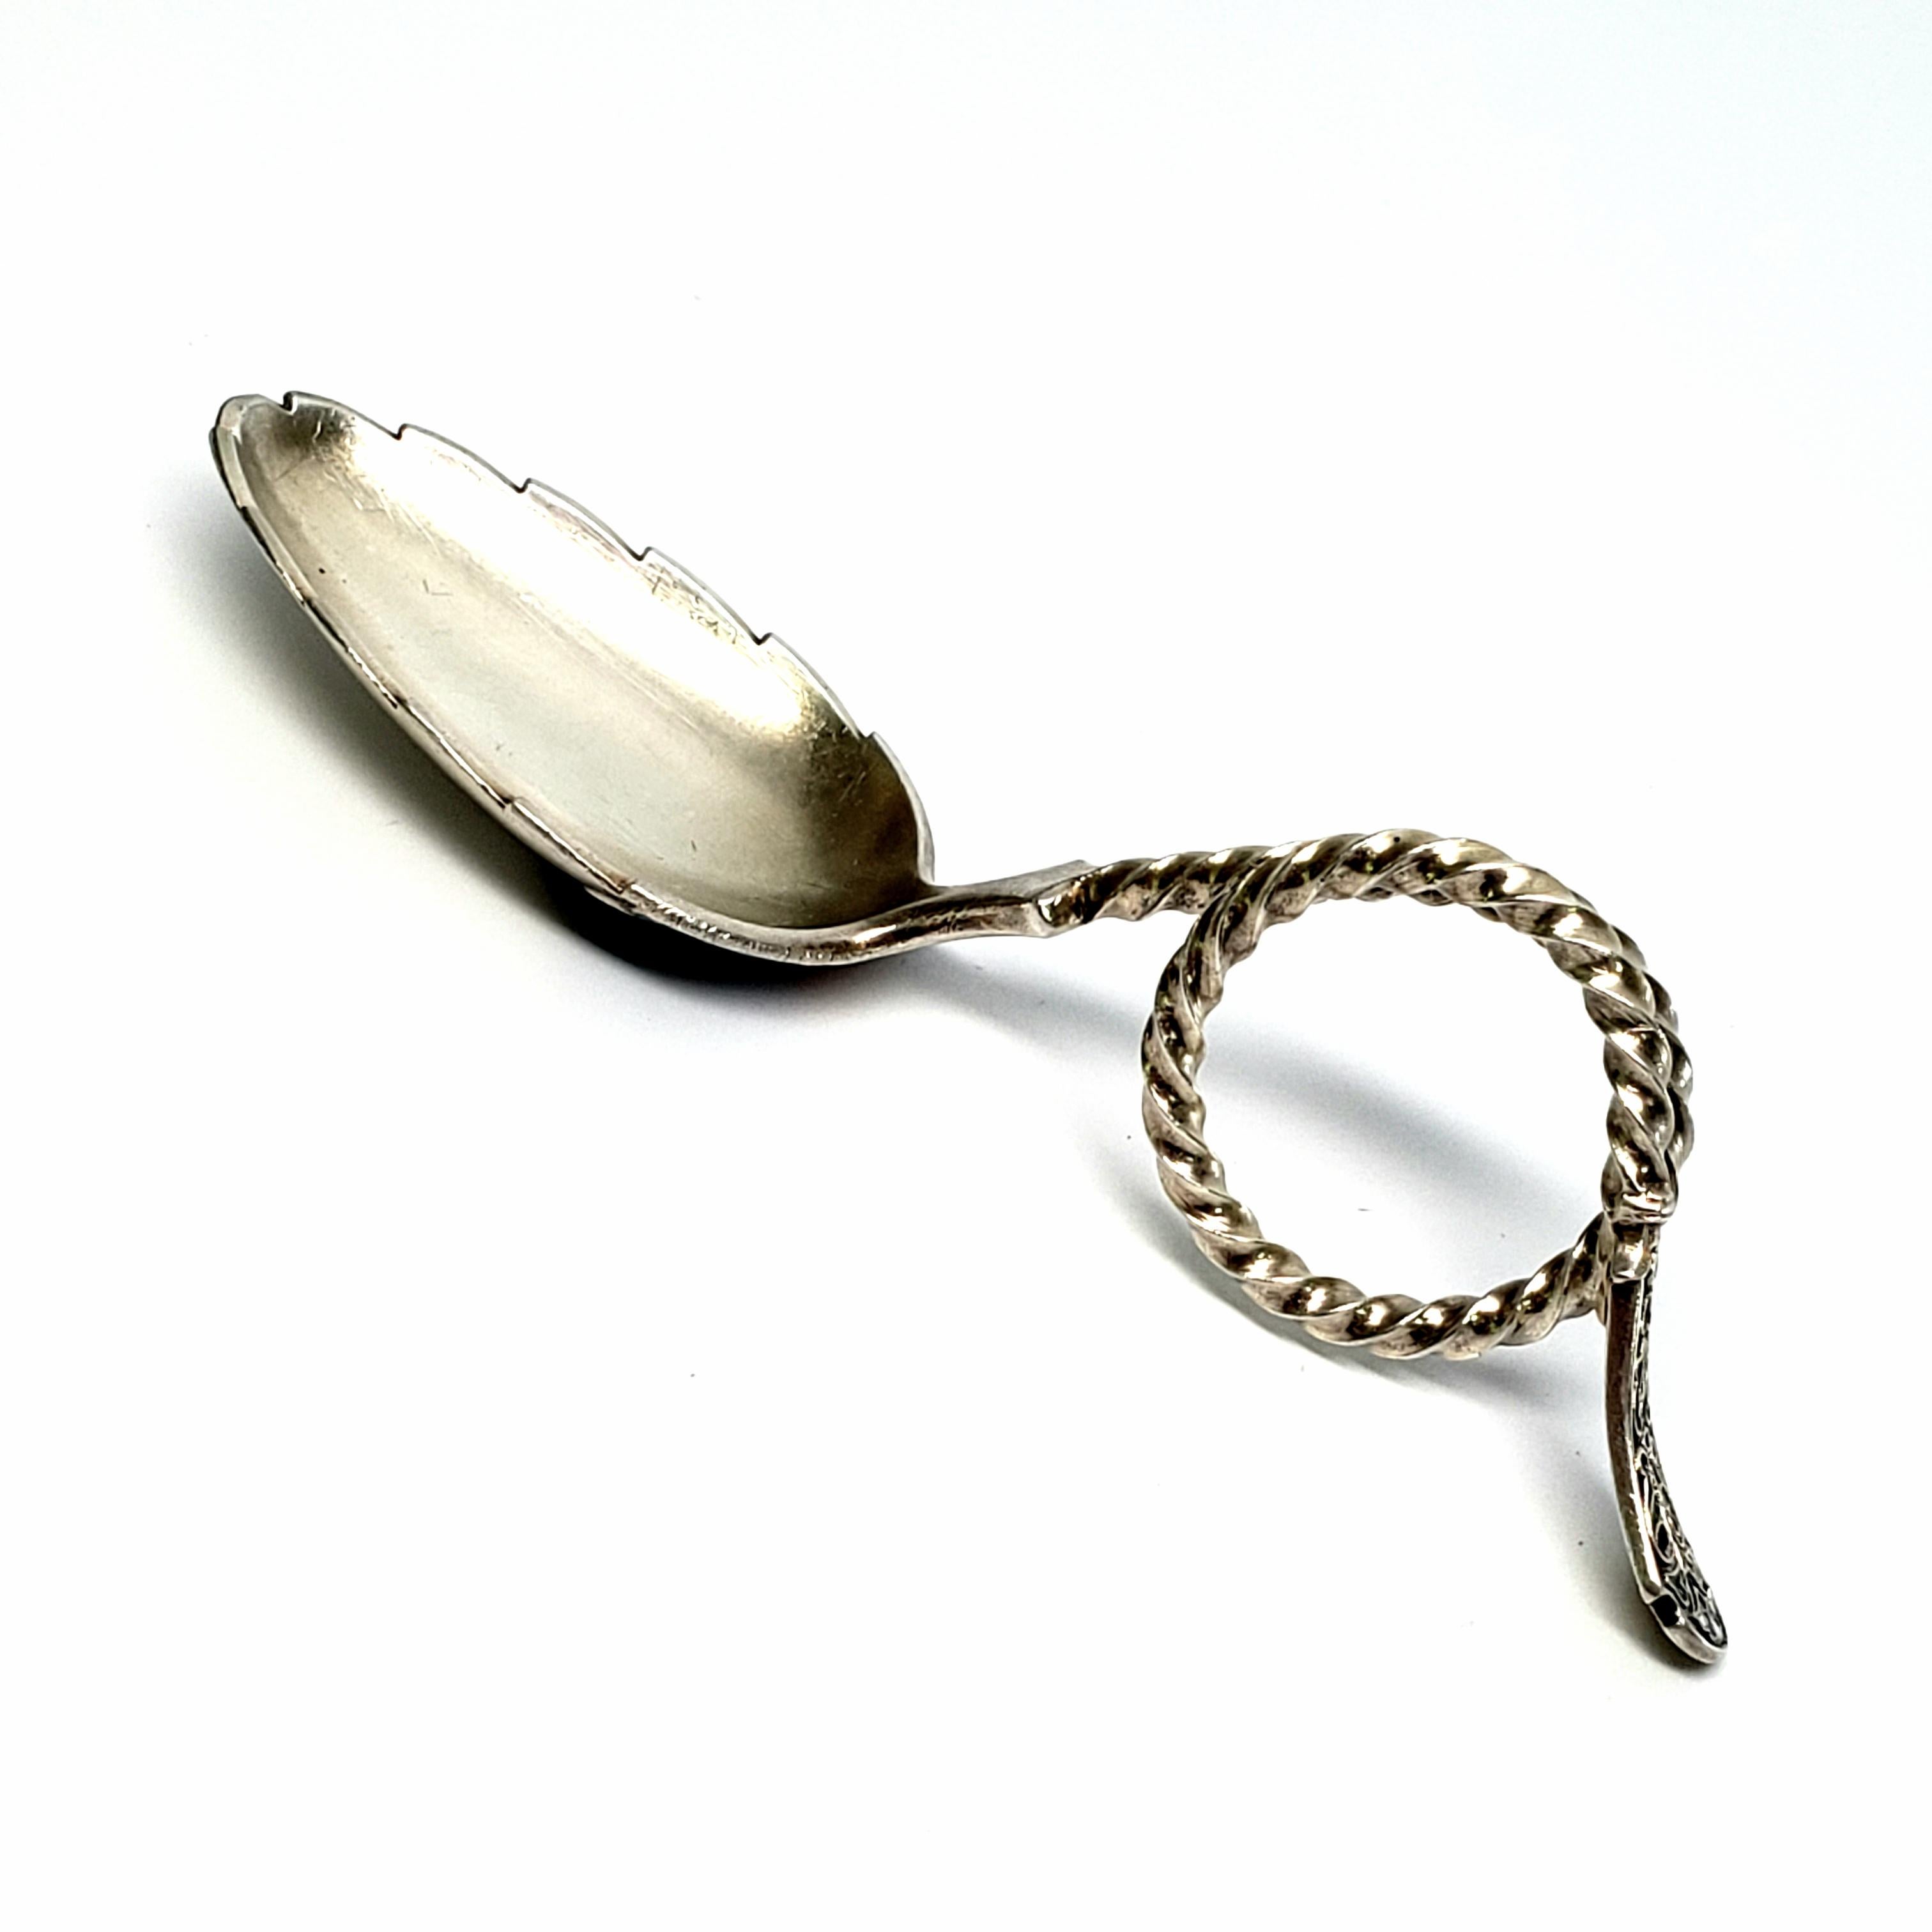 Vintage sterling silver spoon by David Andersen Norway. Early David Andersen hallmark dates the piece between 1888-1925.

Beautiful cloisonné enamel work on the back of the bowl, and the top, front of the handle. Serated design around the edge of